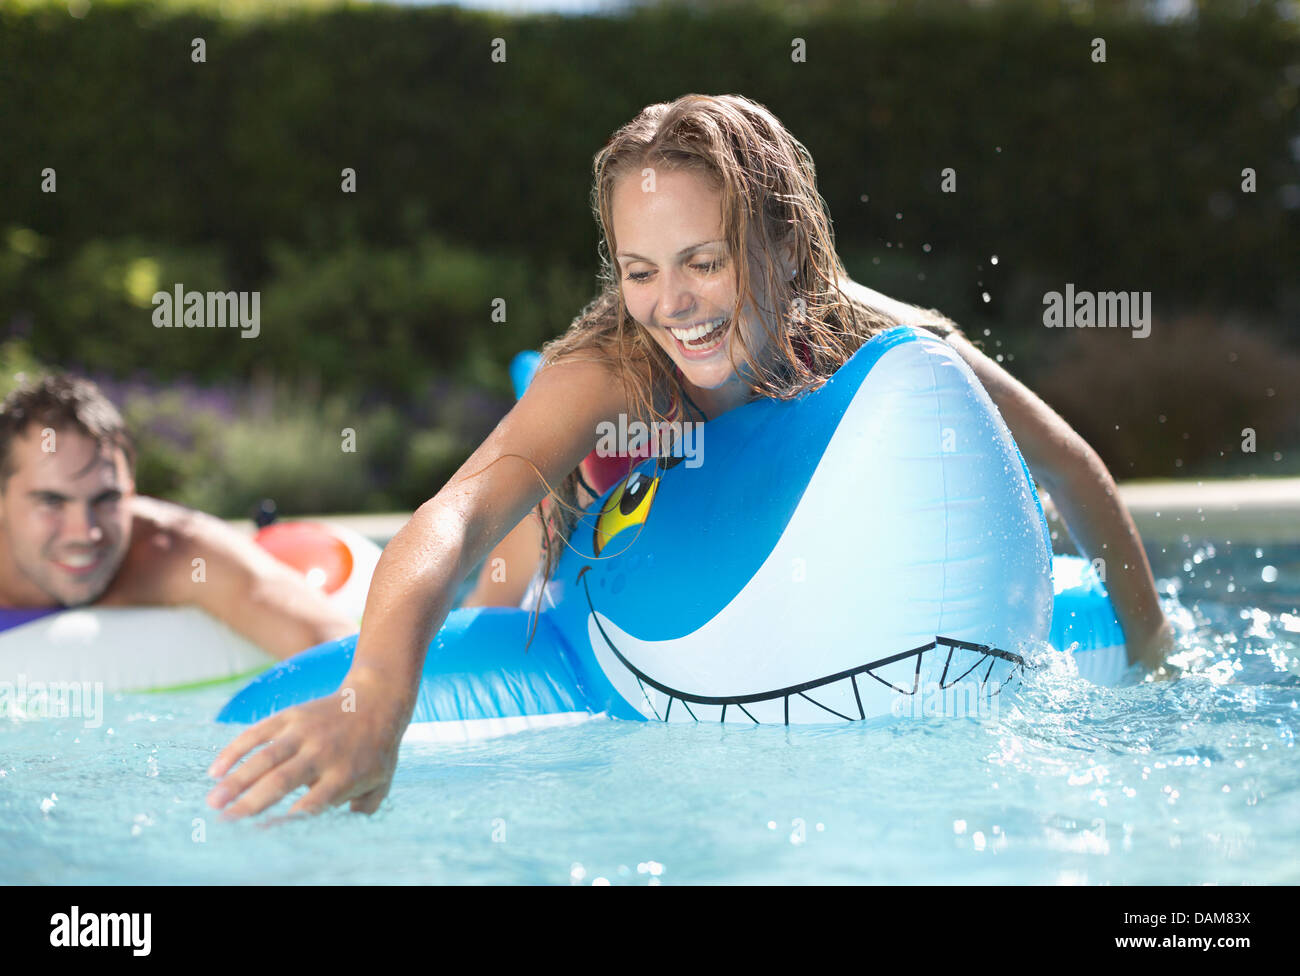 Femme jouant sur inflatable toy in swimming pool Banque D'Images